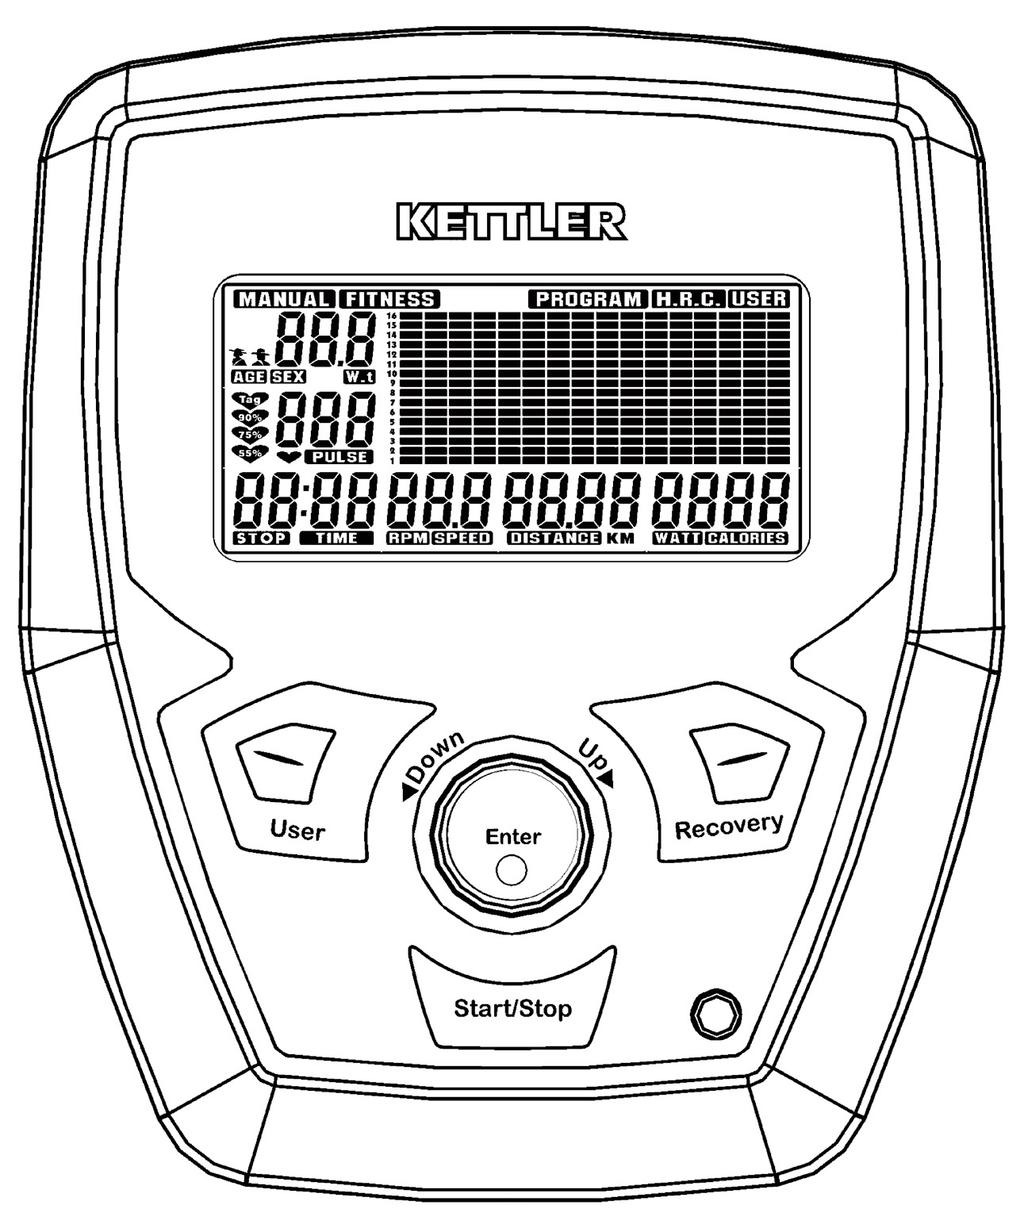 Brief description SM 9150-75 The machine is equipped with a functional area with buttons and a display area (display) with variable symbols and graphics.